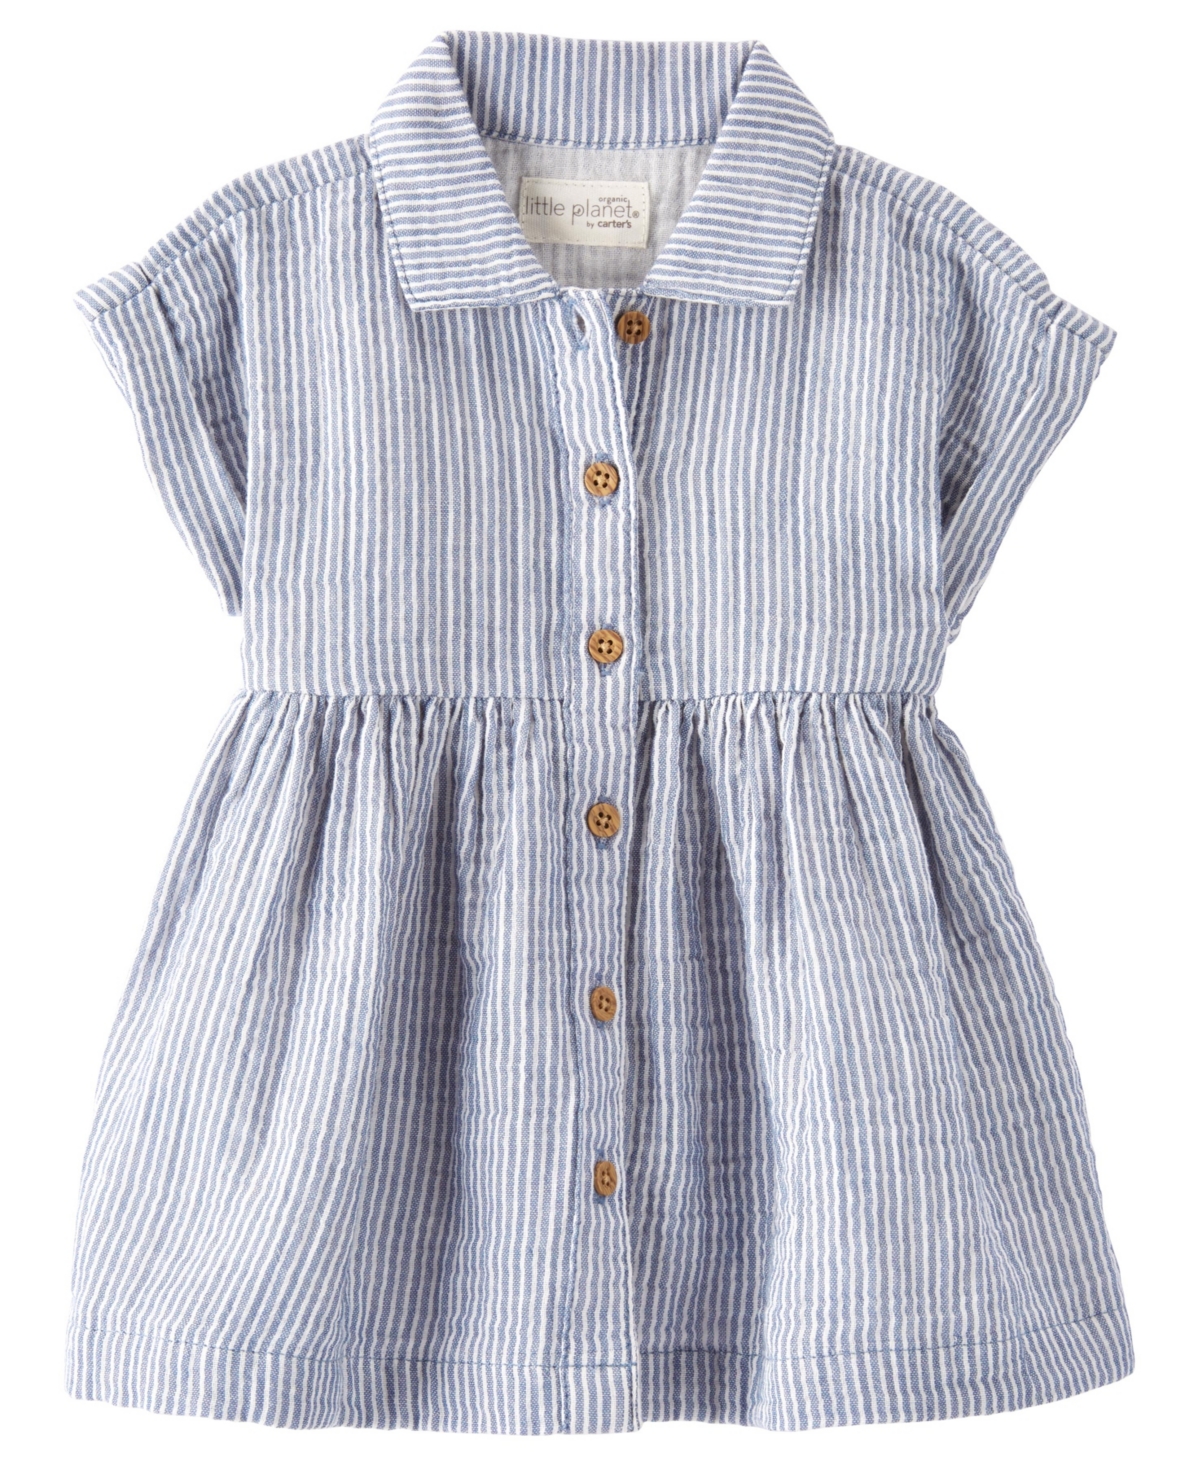 Shop Carter's Little Planet By  Baby Girls Organic Cotton Button-front Dress In Blue